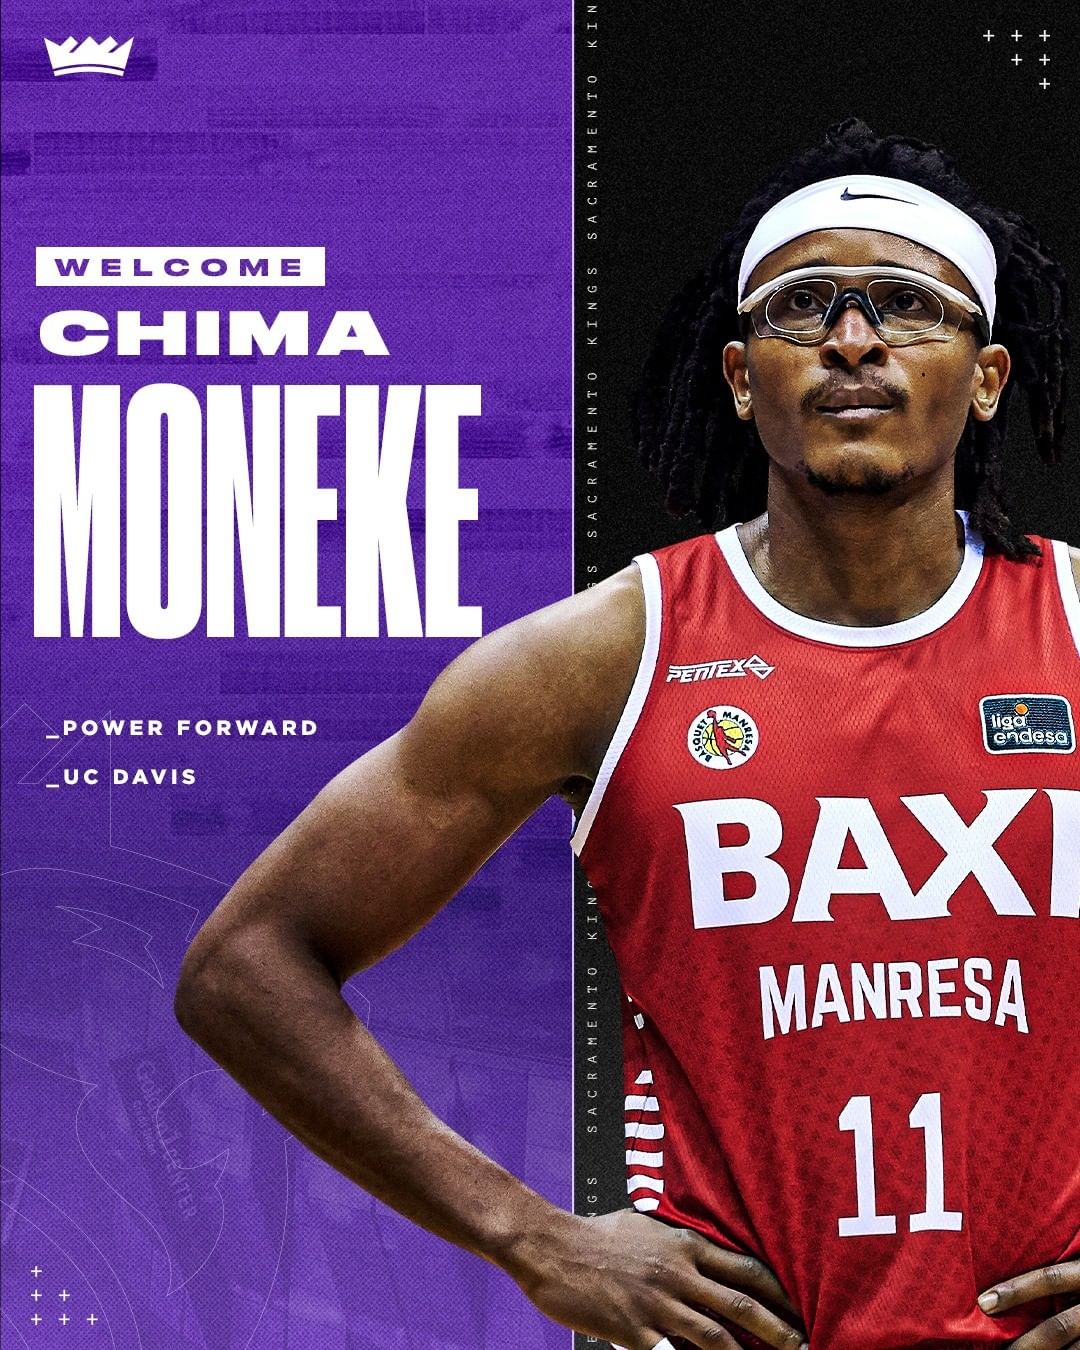 Welcome to Sactown, @chimdoggg!...